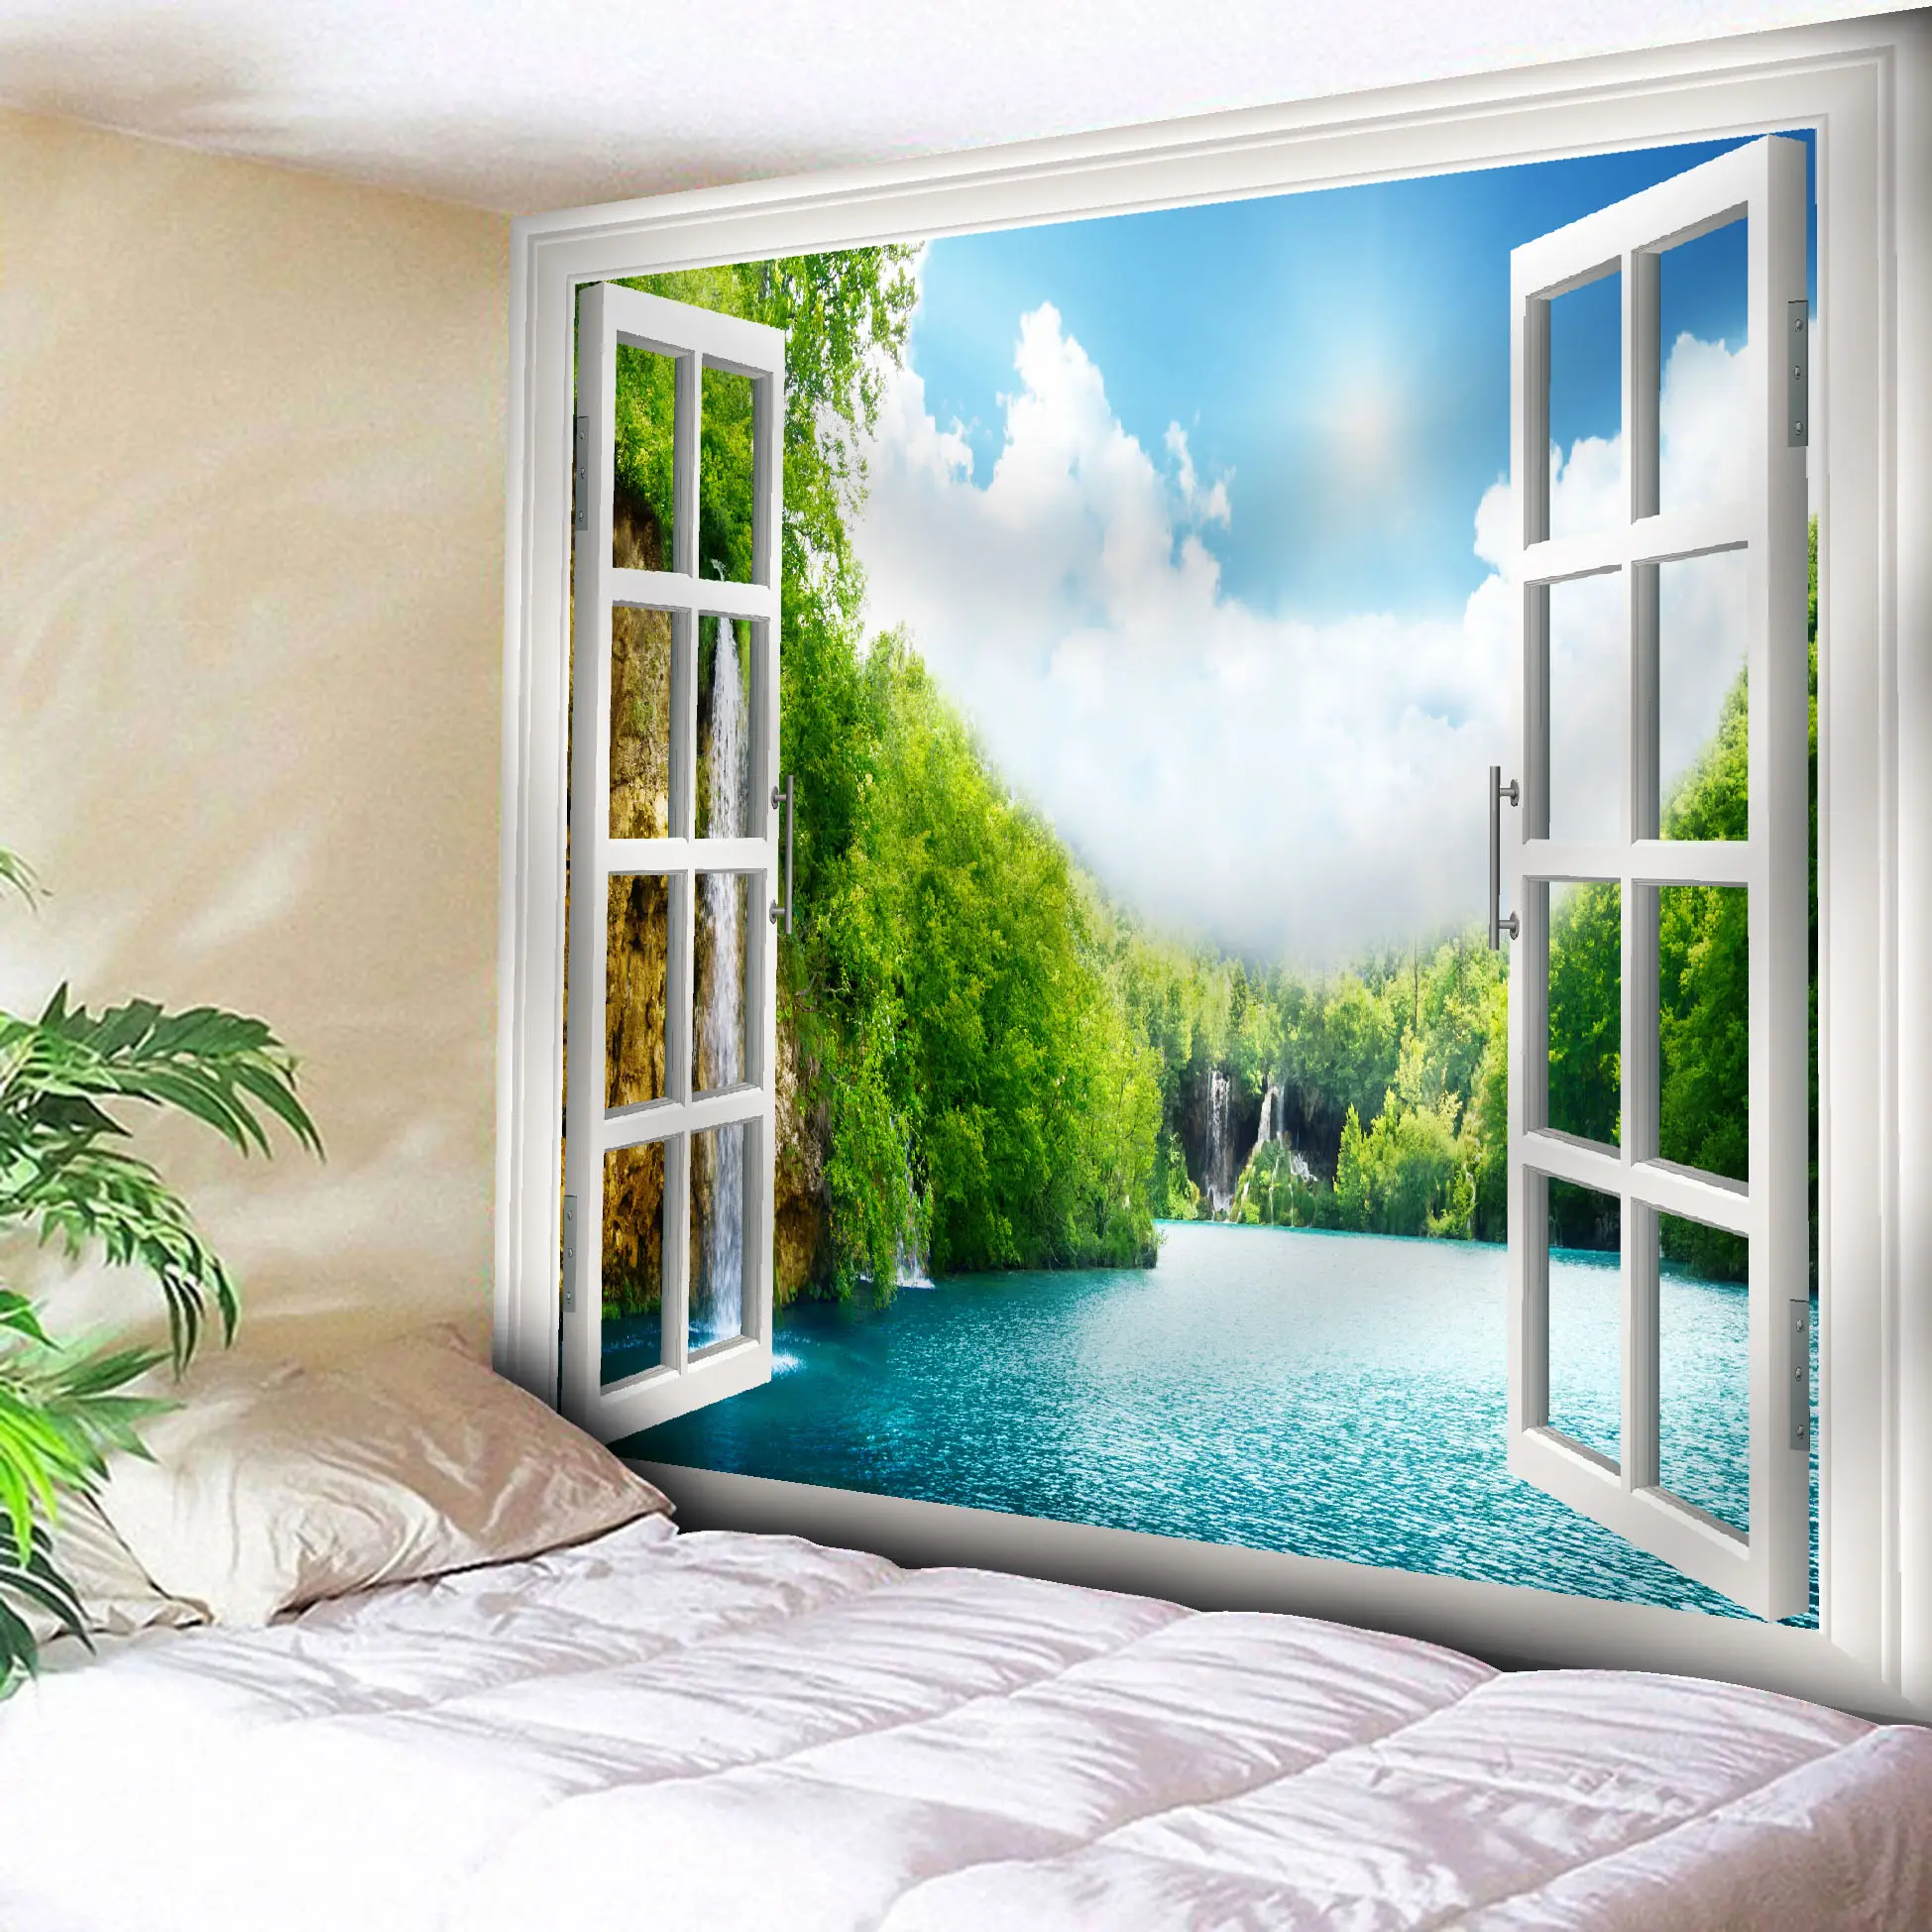 Light weight Fabric Window with Ocean Beach Landscape Scenic View Wall Tapestry 80*60 Inch